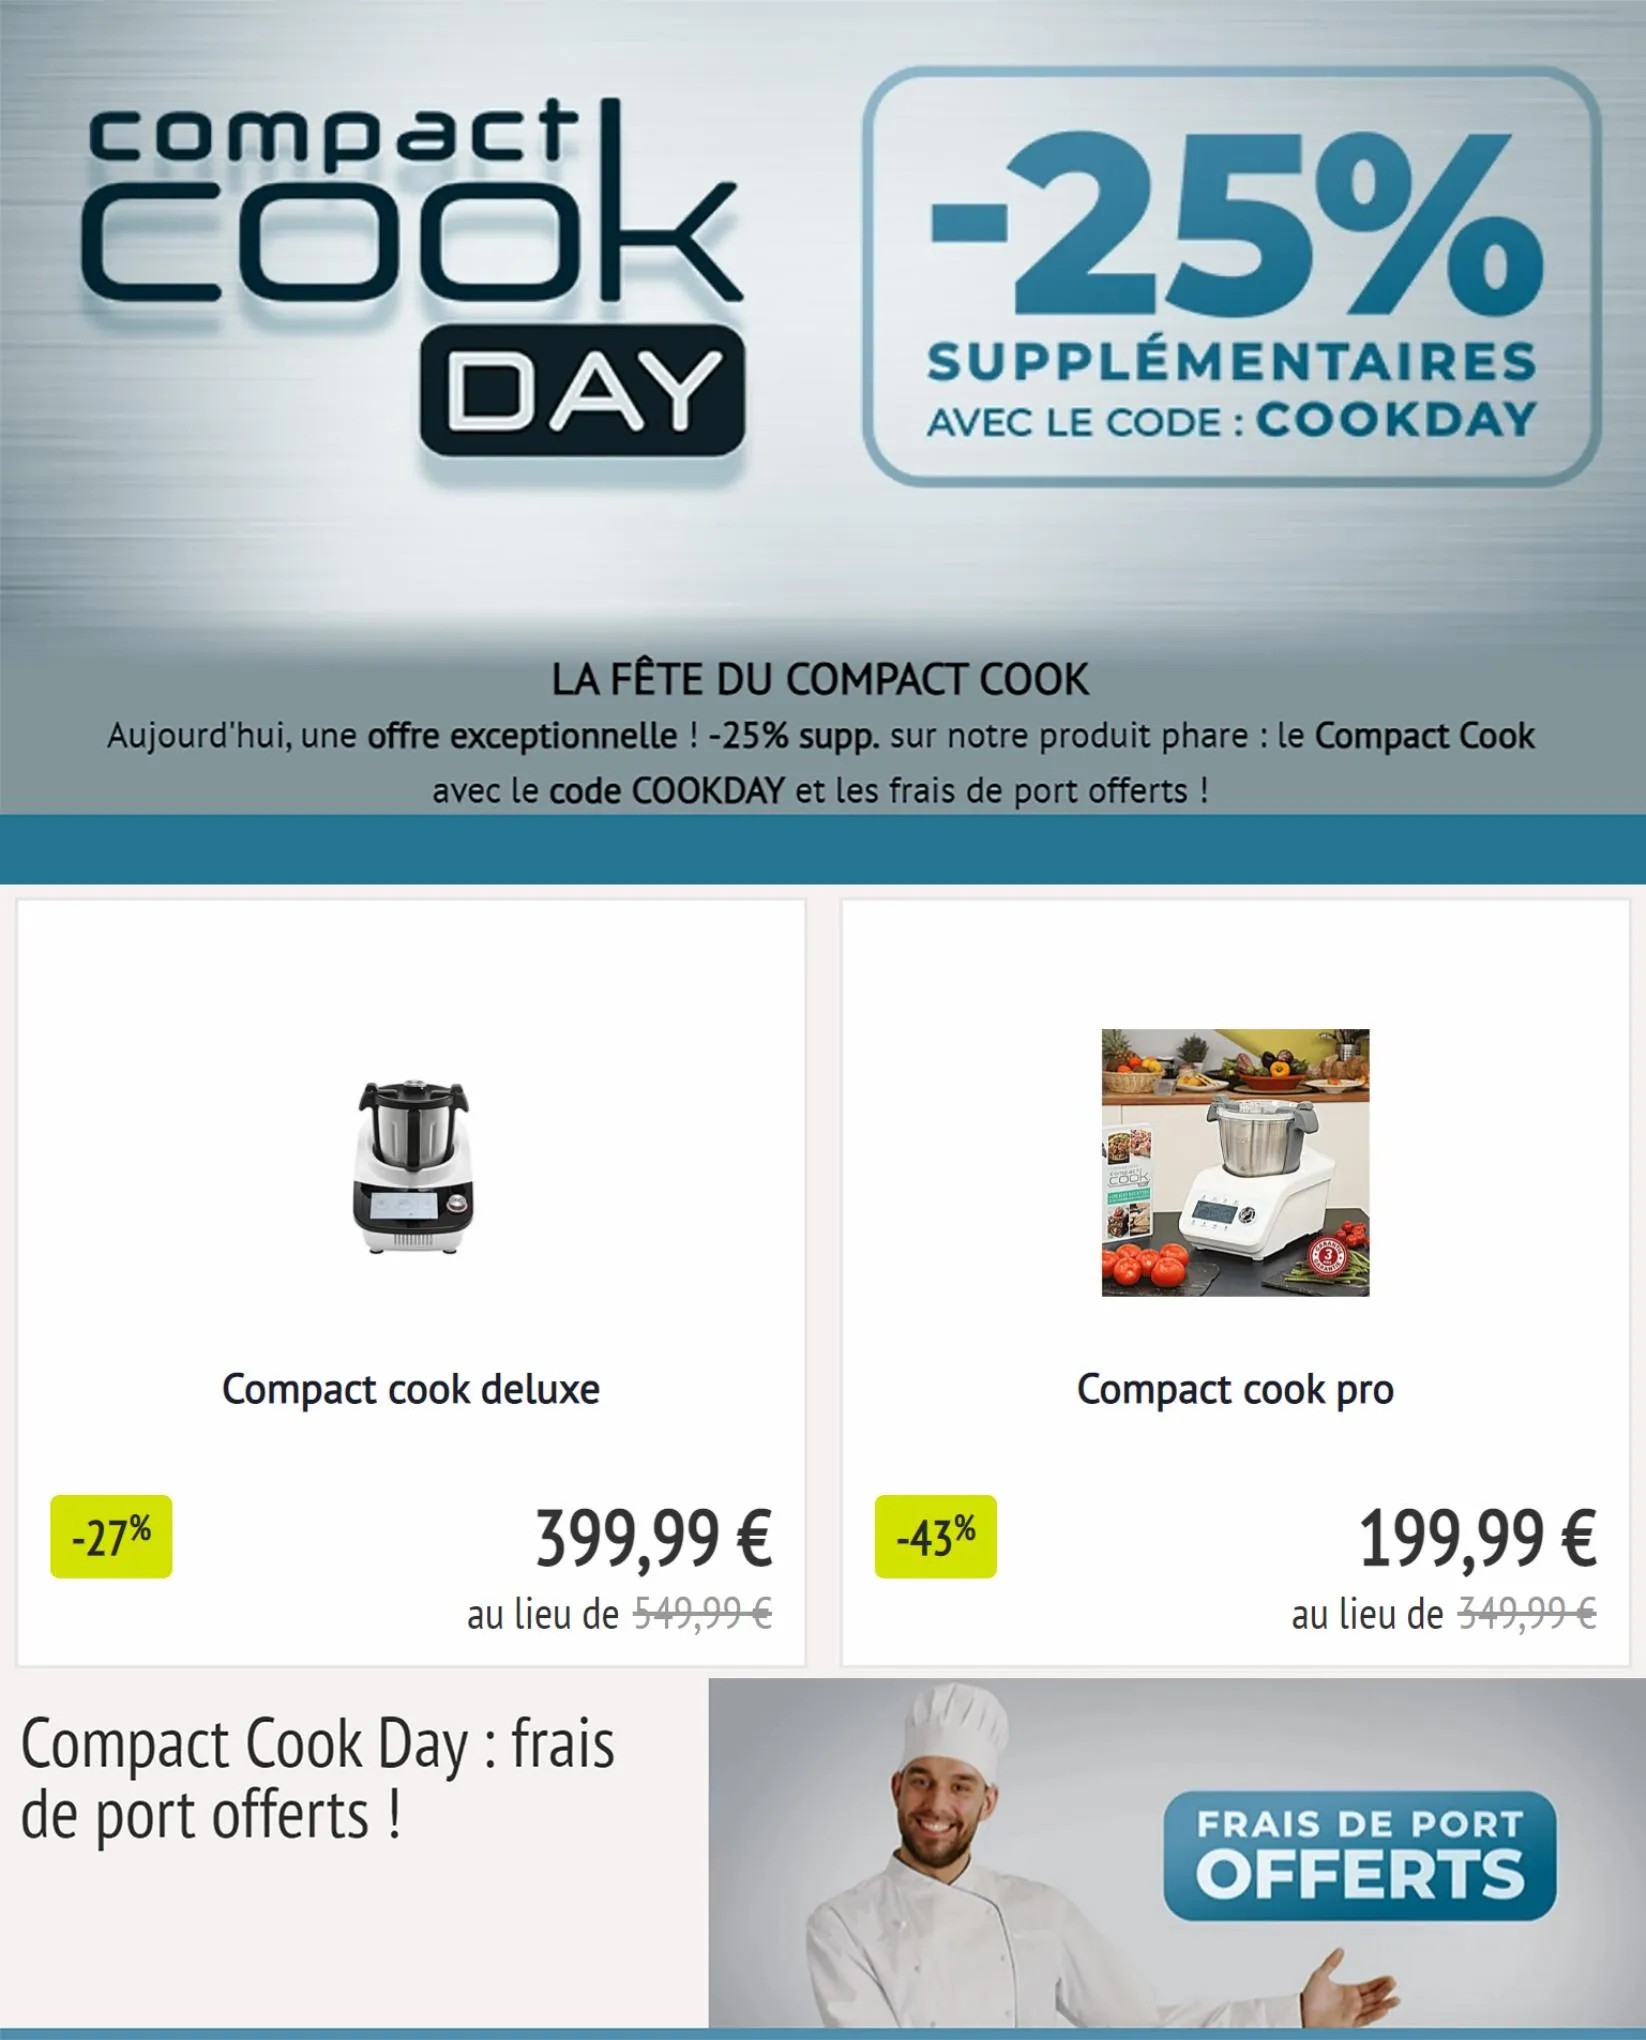 Catalogue COOKDAY -25% supplémentaires!, page 00002